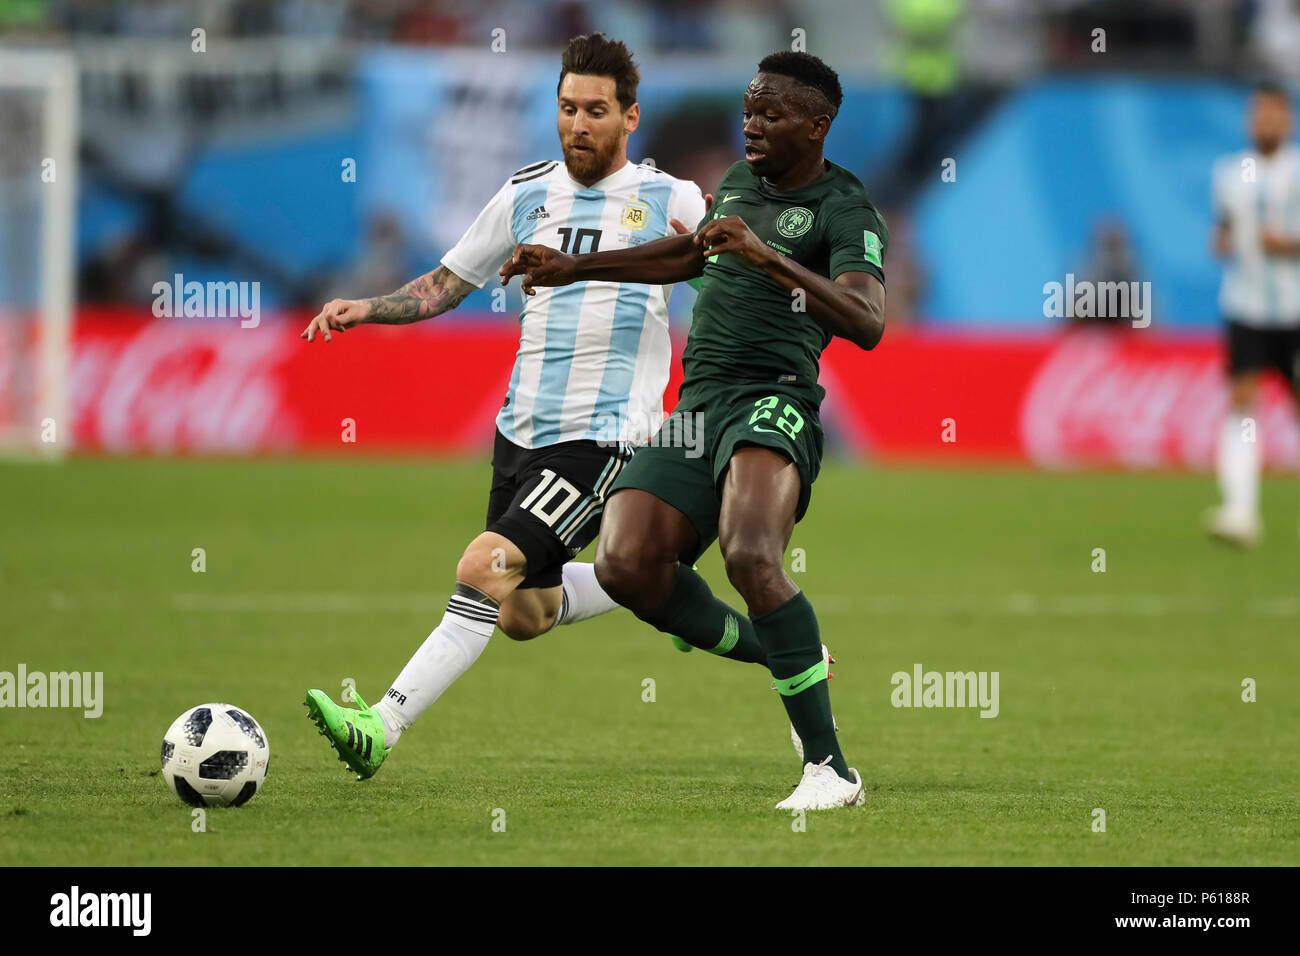 St Petersburg, Russia. 26th Jun, 2018. Lionel Messi of Argentina and Kenneth Omeruo of Nigeria during the 2018 FIFA World Cup Group D match between Nigeria and Argentina at Saint Petersburg Stadium on June 26th 2018 in Saint Petersburg, Russia. (Photo by Daniel Chesterton/phcimages.com) Credit: PHC Images/Alamy Live News Stock Photo